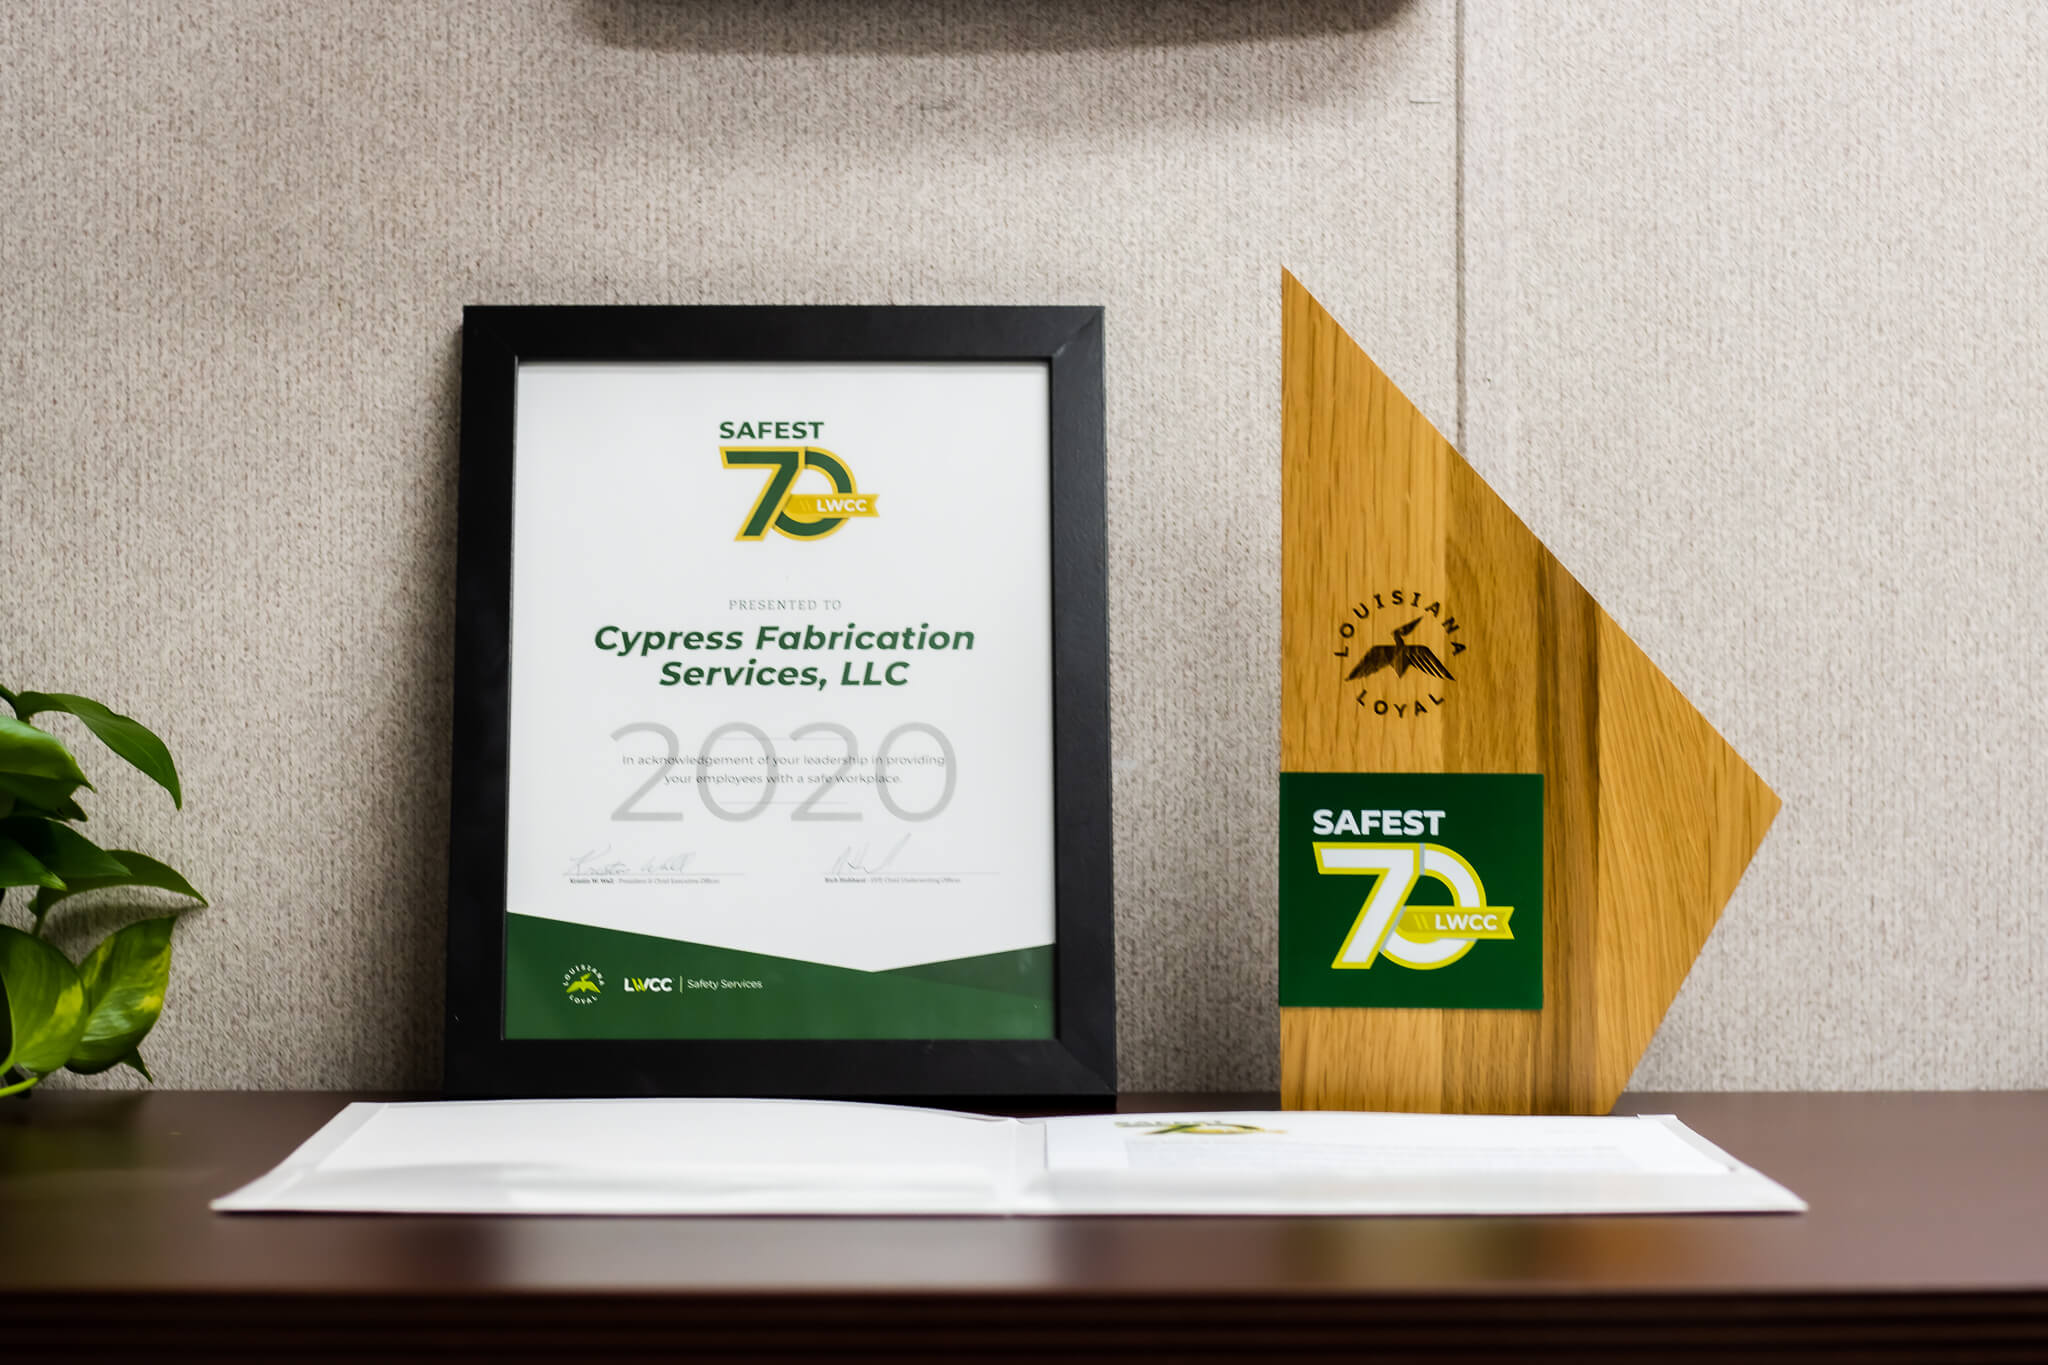 LWCC Safest 70 award from 2020 to Cypress Fabrication Services